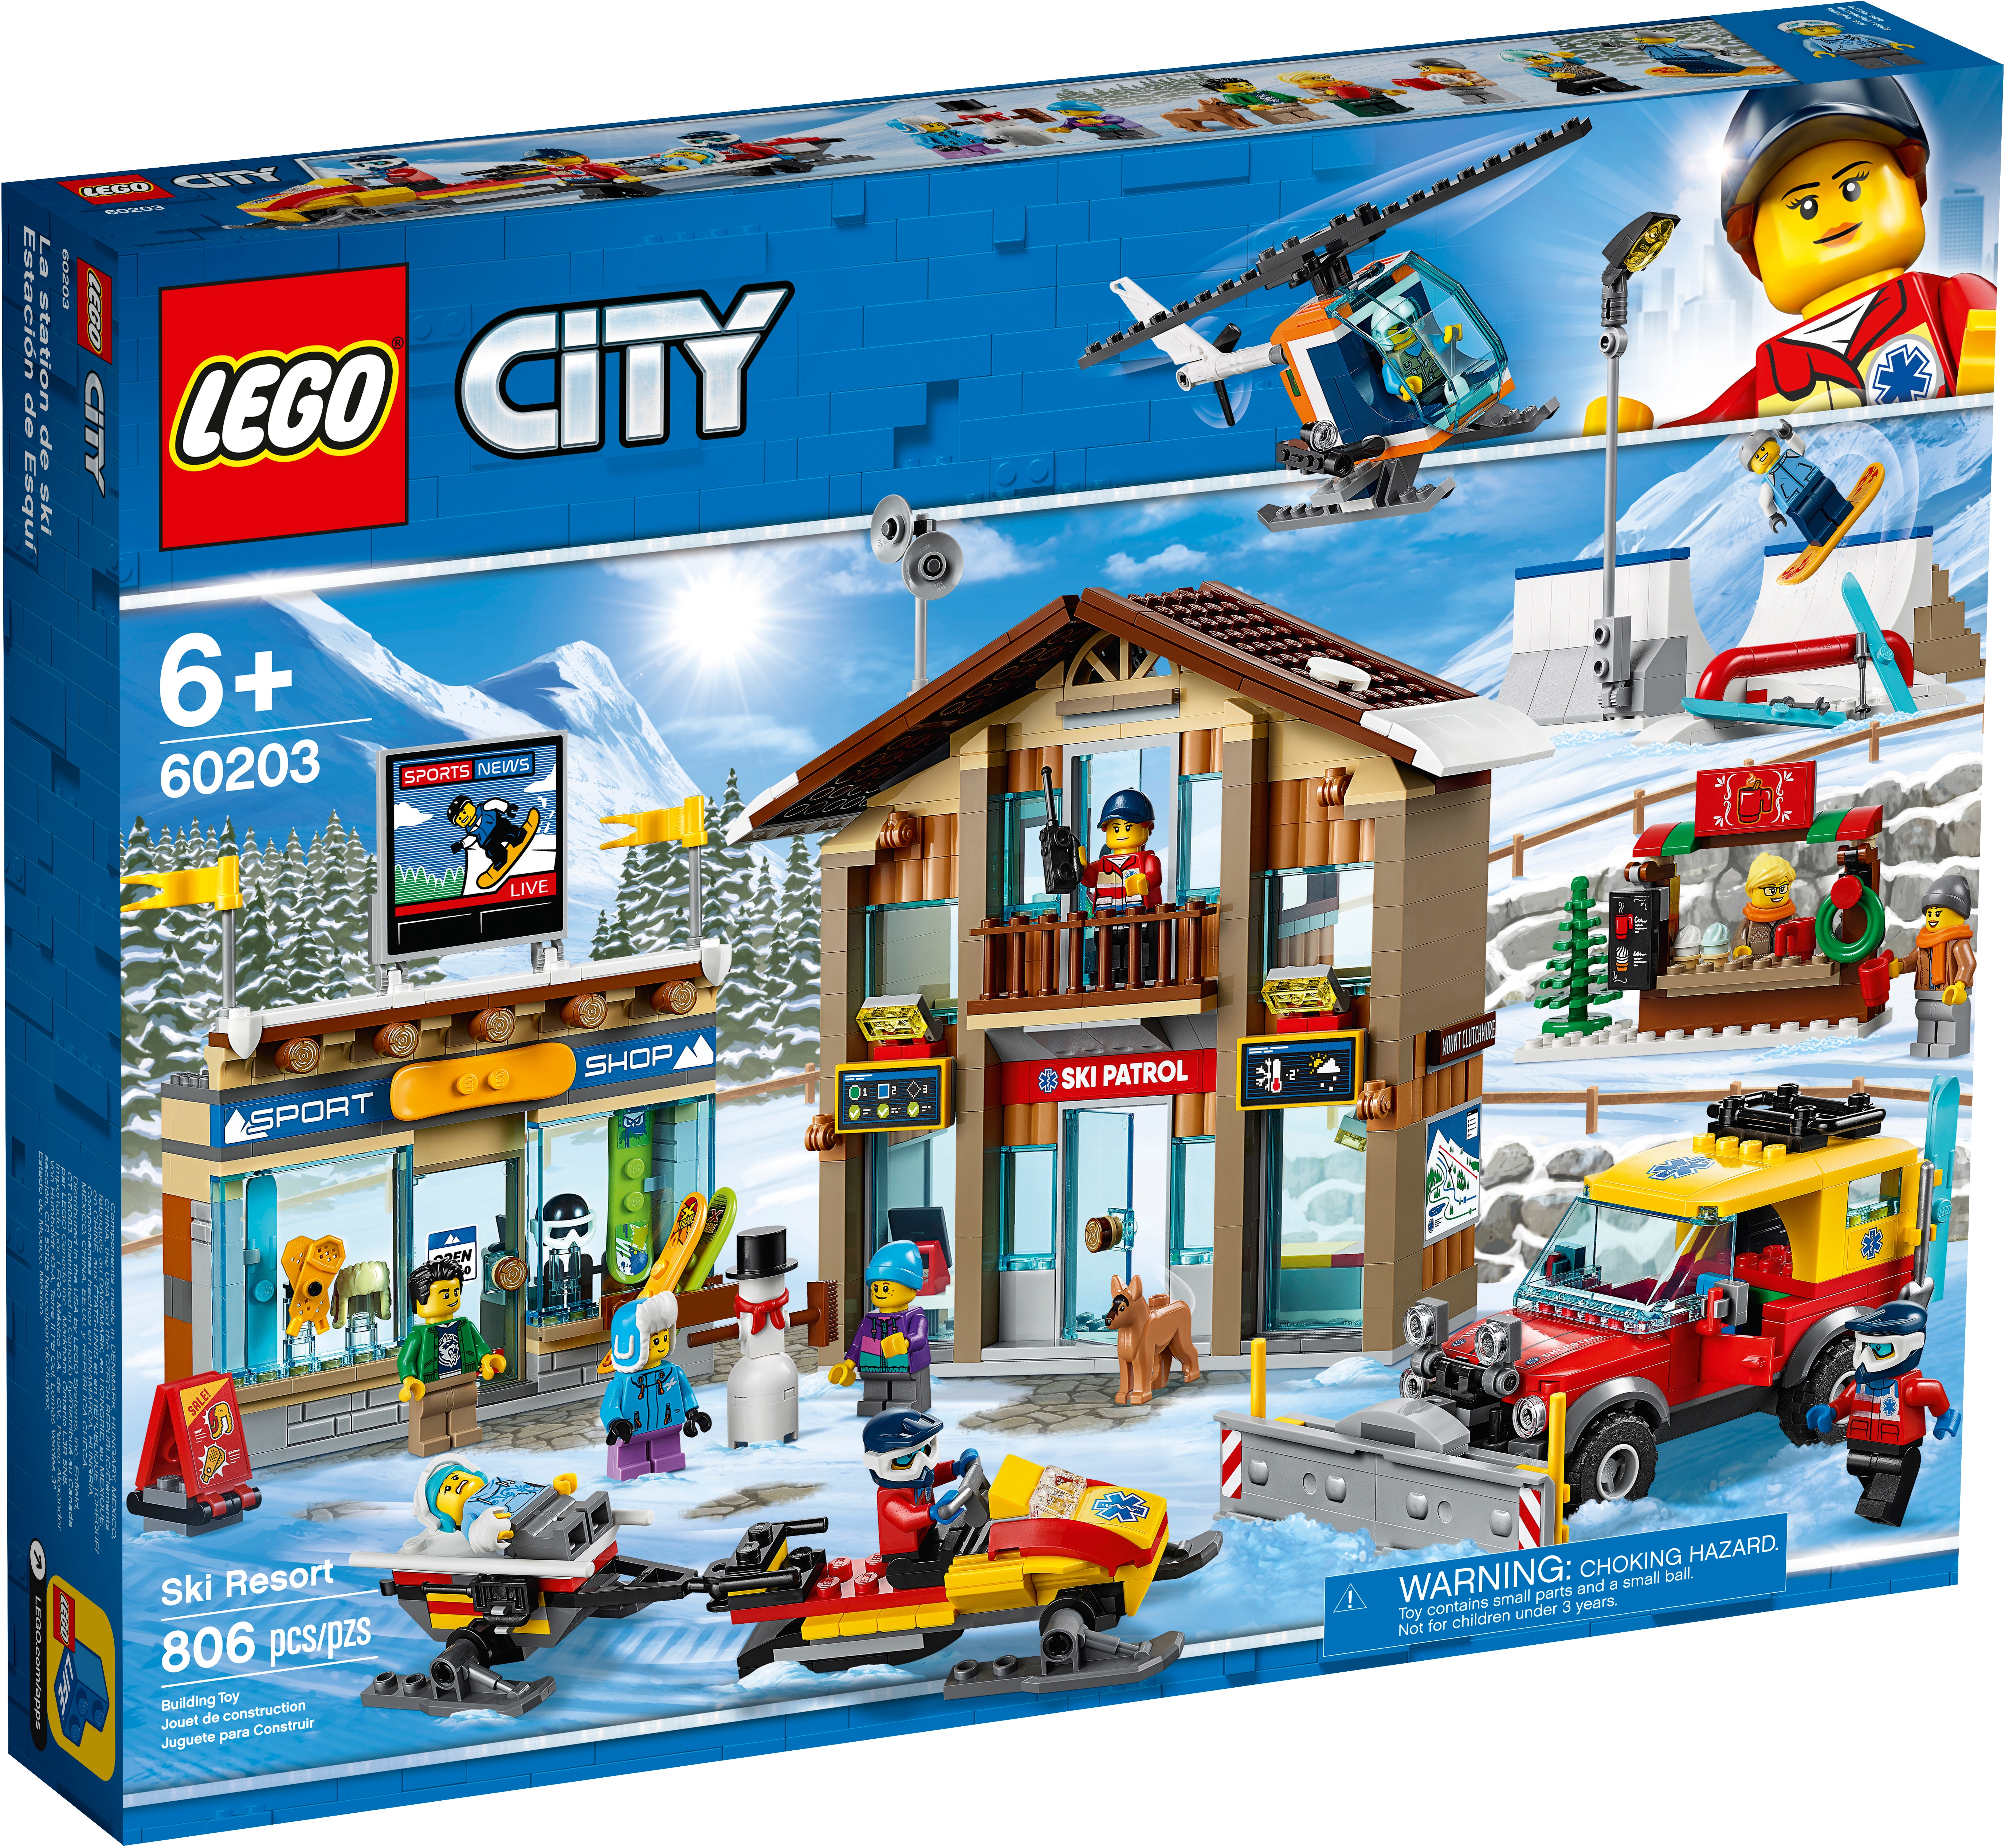 all of the lego city sets